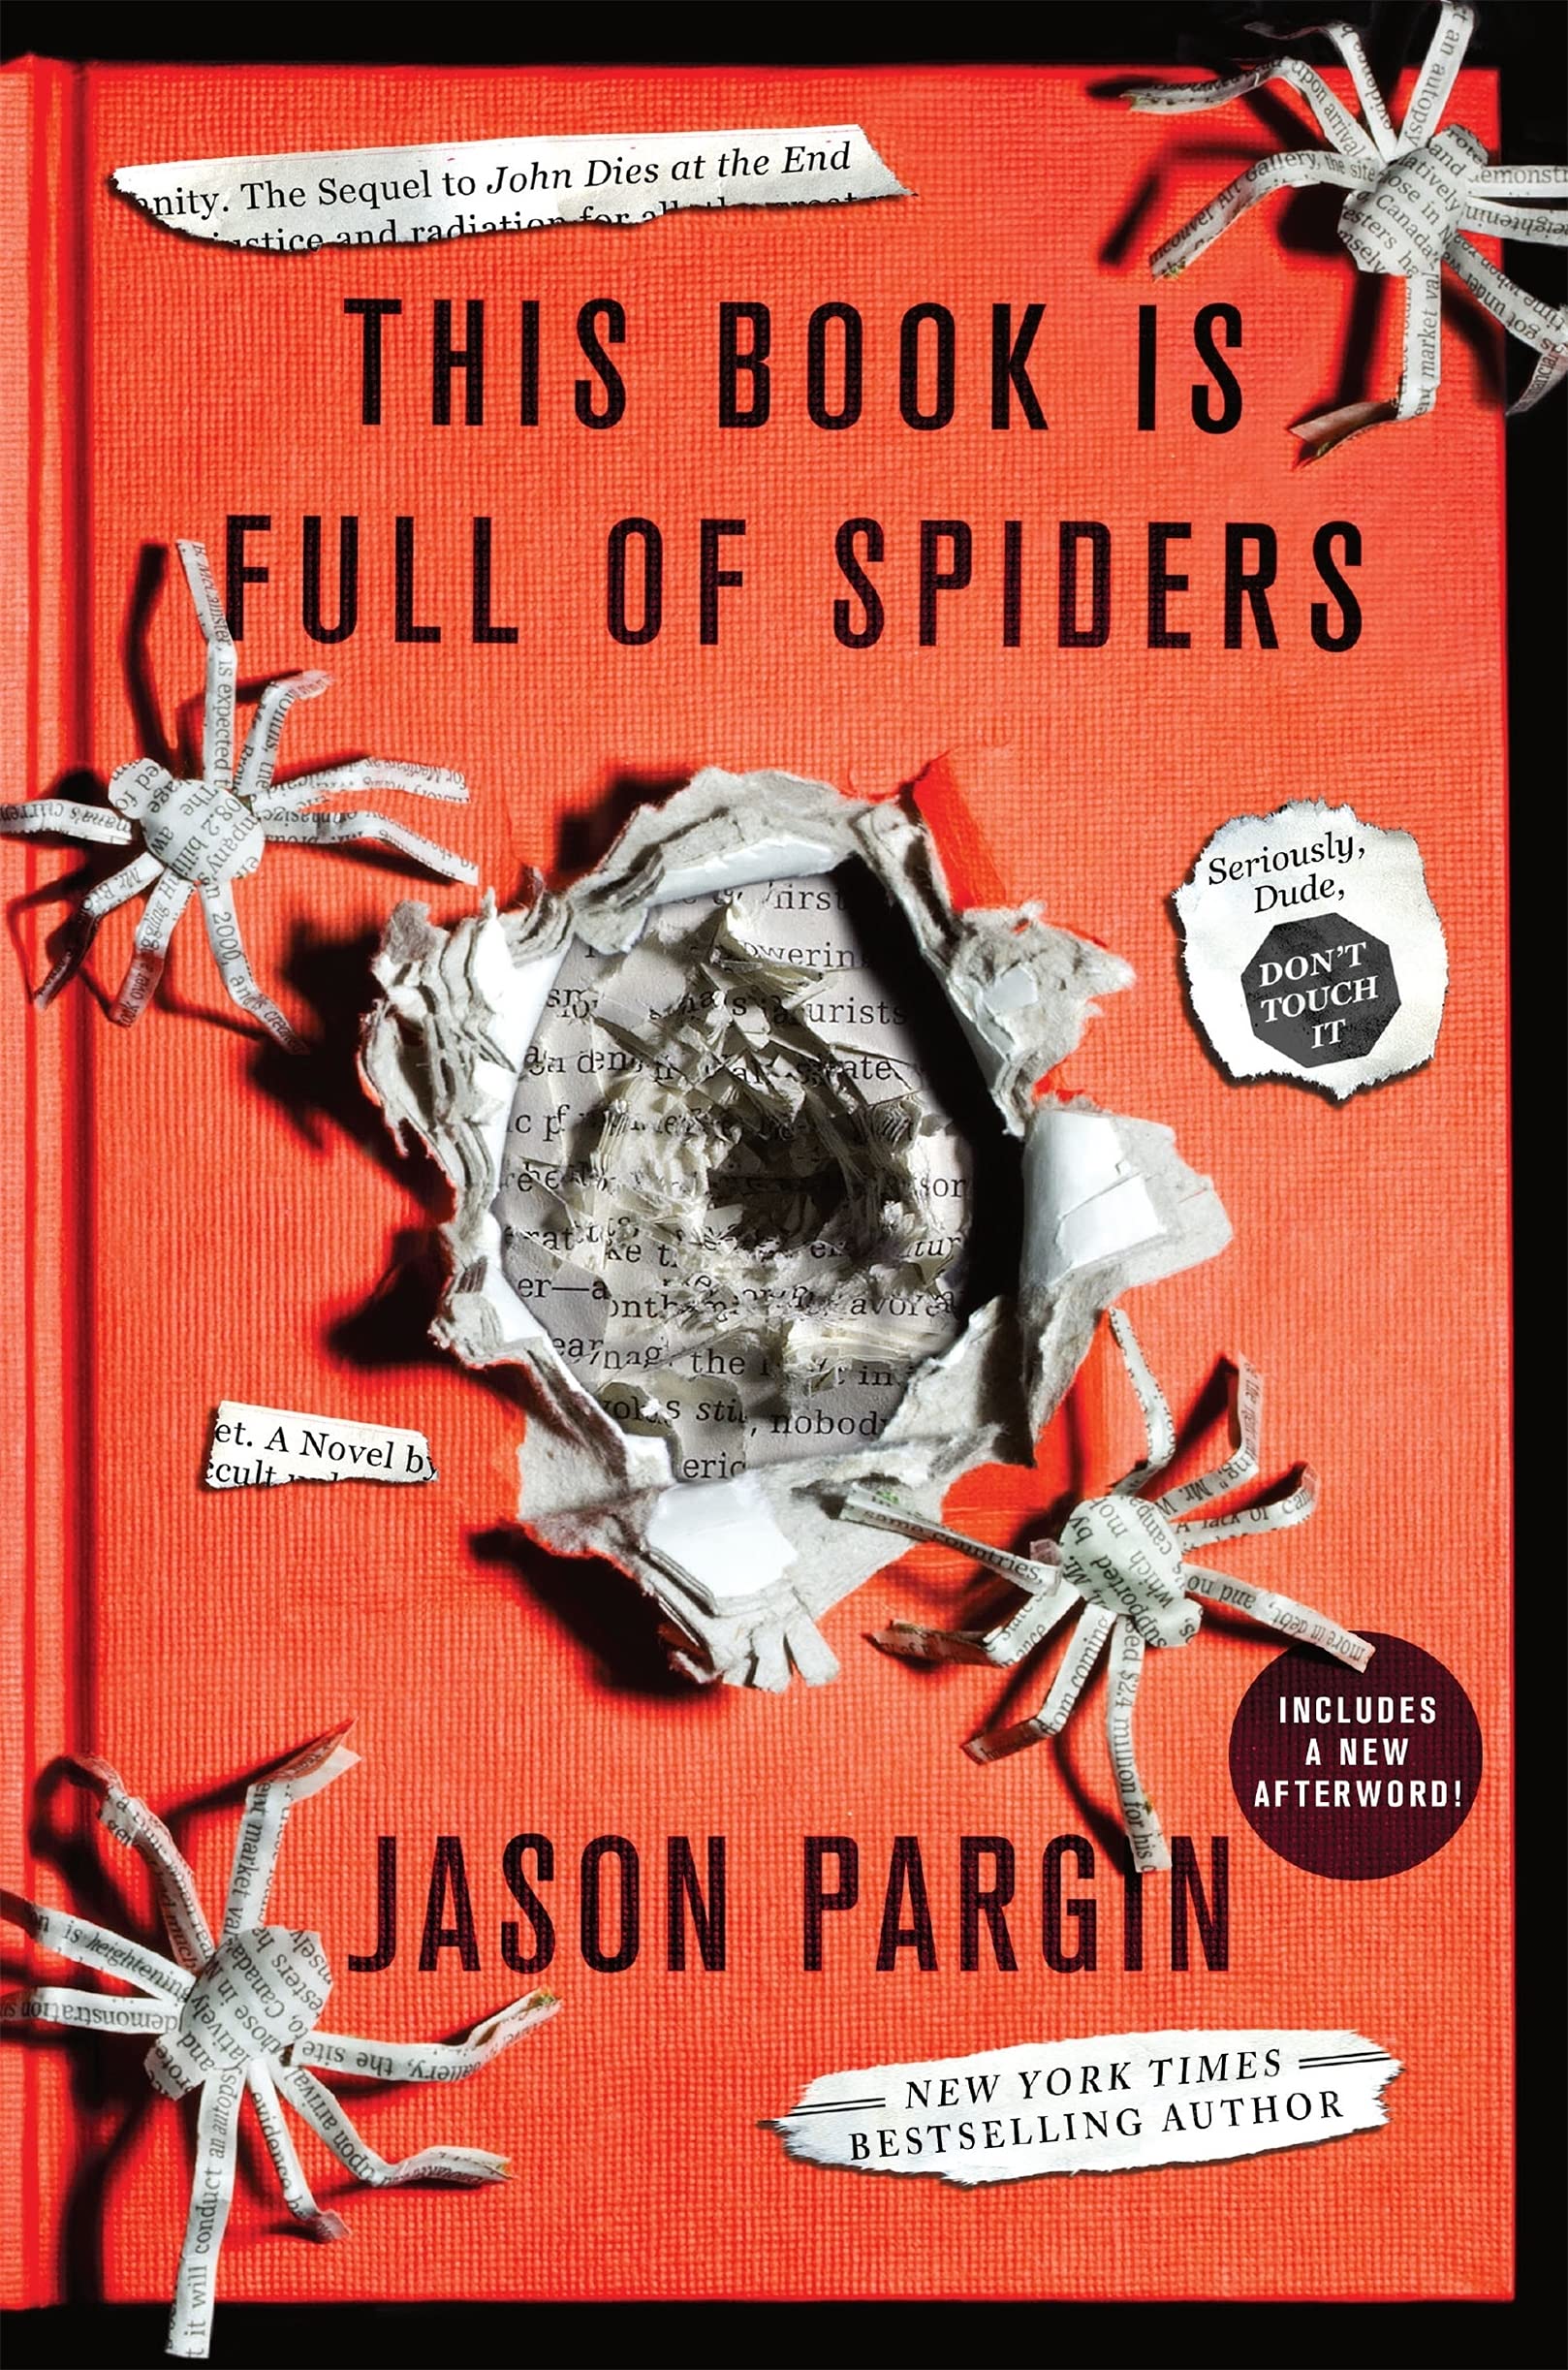 This Book Is Full of Spiders: Seriously, Dude, Don't Touch It (John Dies at the End 2) (eBook) by Jason Pargin, David Wong $1.99